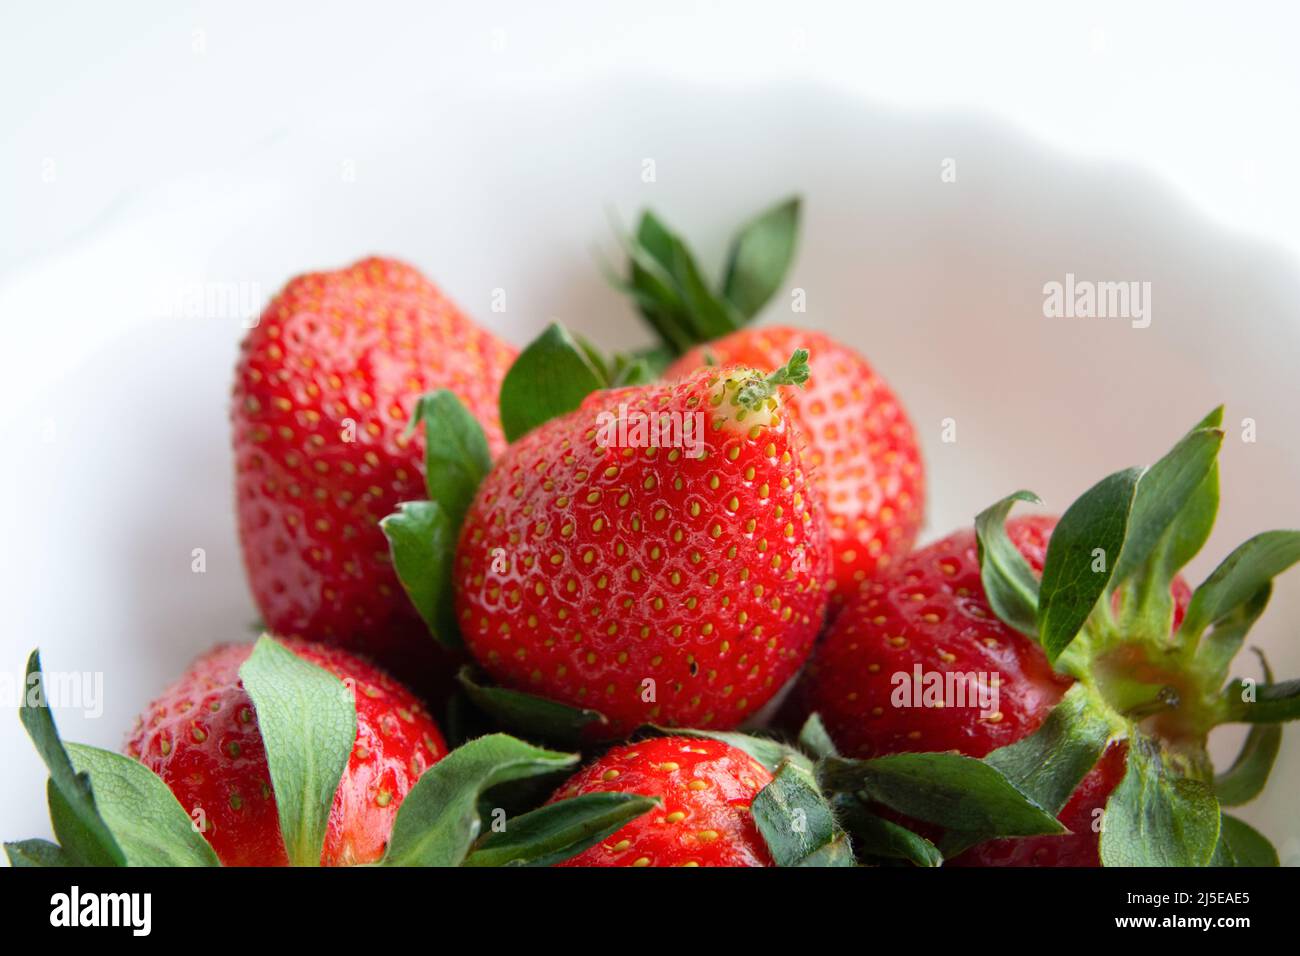 Close-up of strawberry fruit. Some bright red berries on a white dish. Strawberries seeds, between which one is already beginning to germinate. Stock Photo